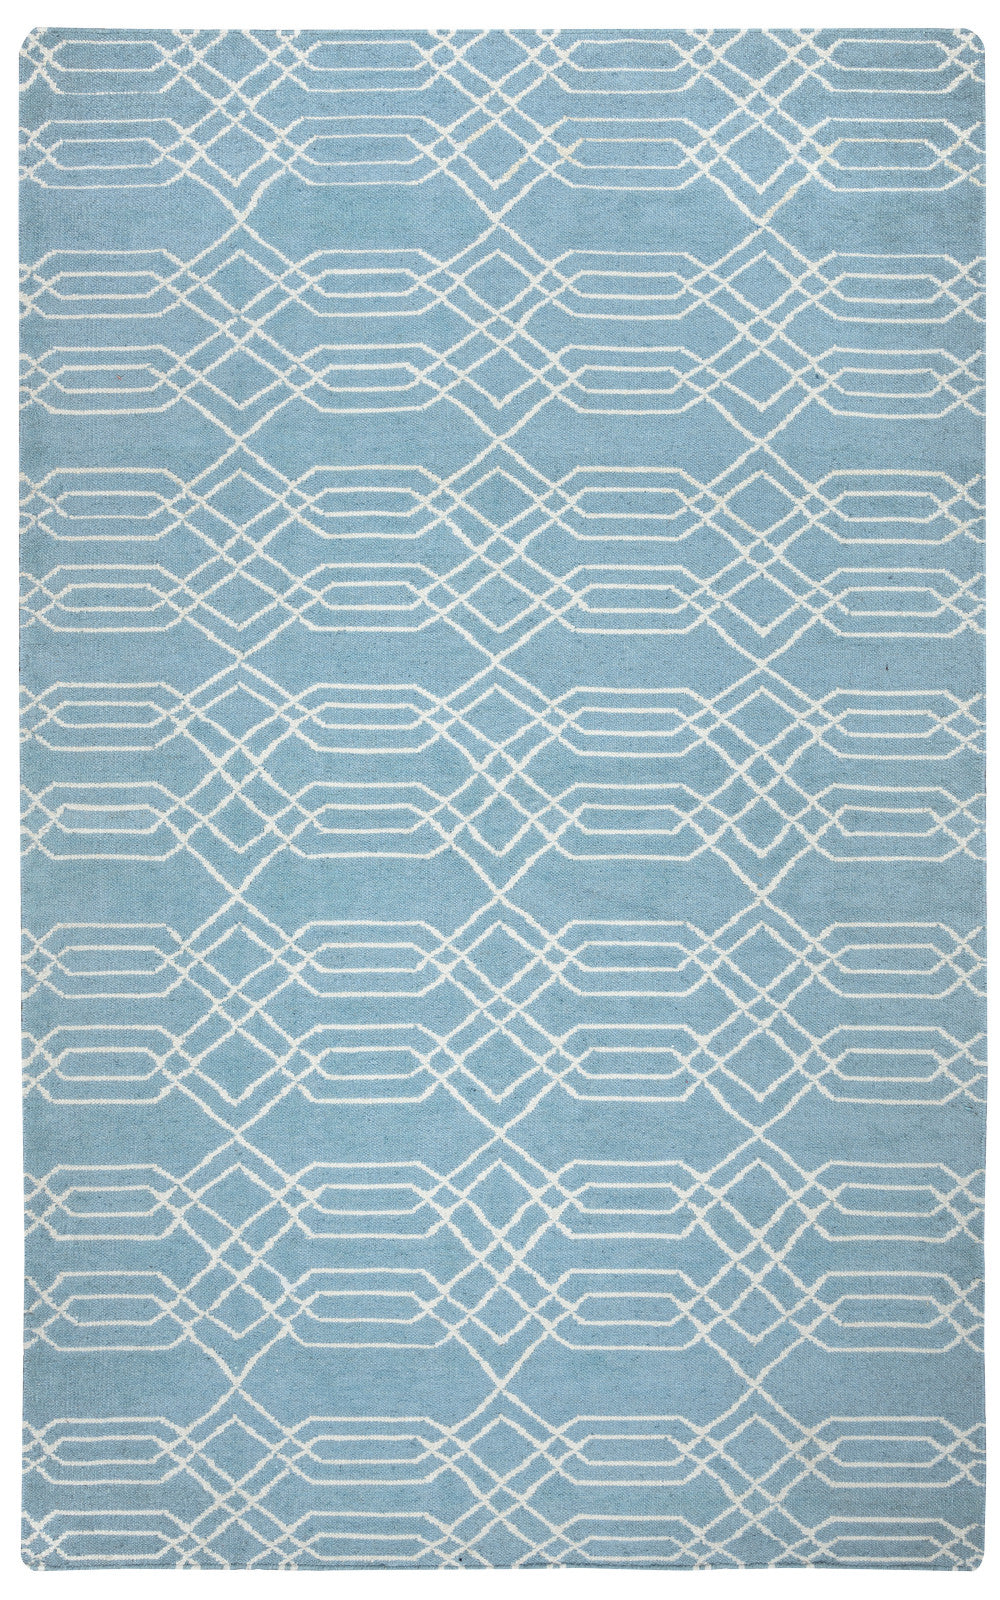 Rizzy Swing SG8159 Blue Area Rug